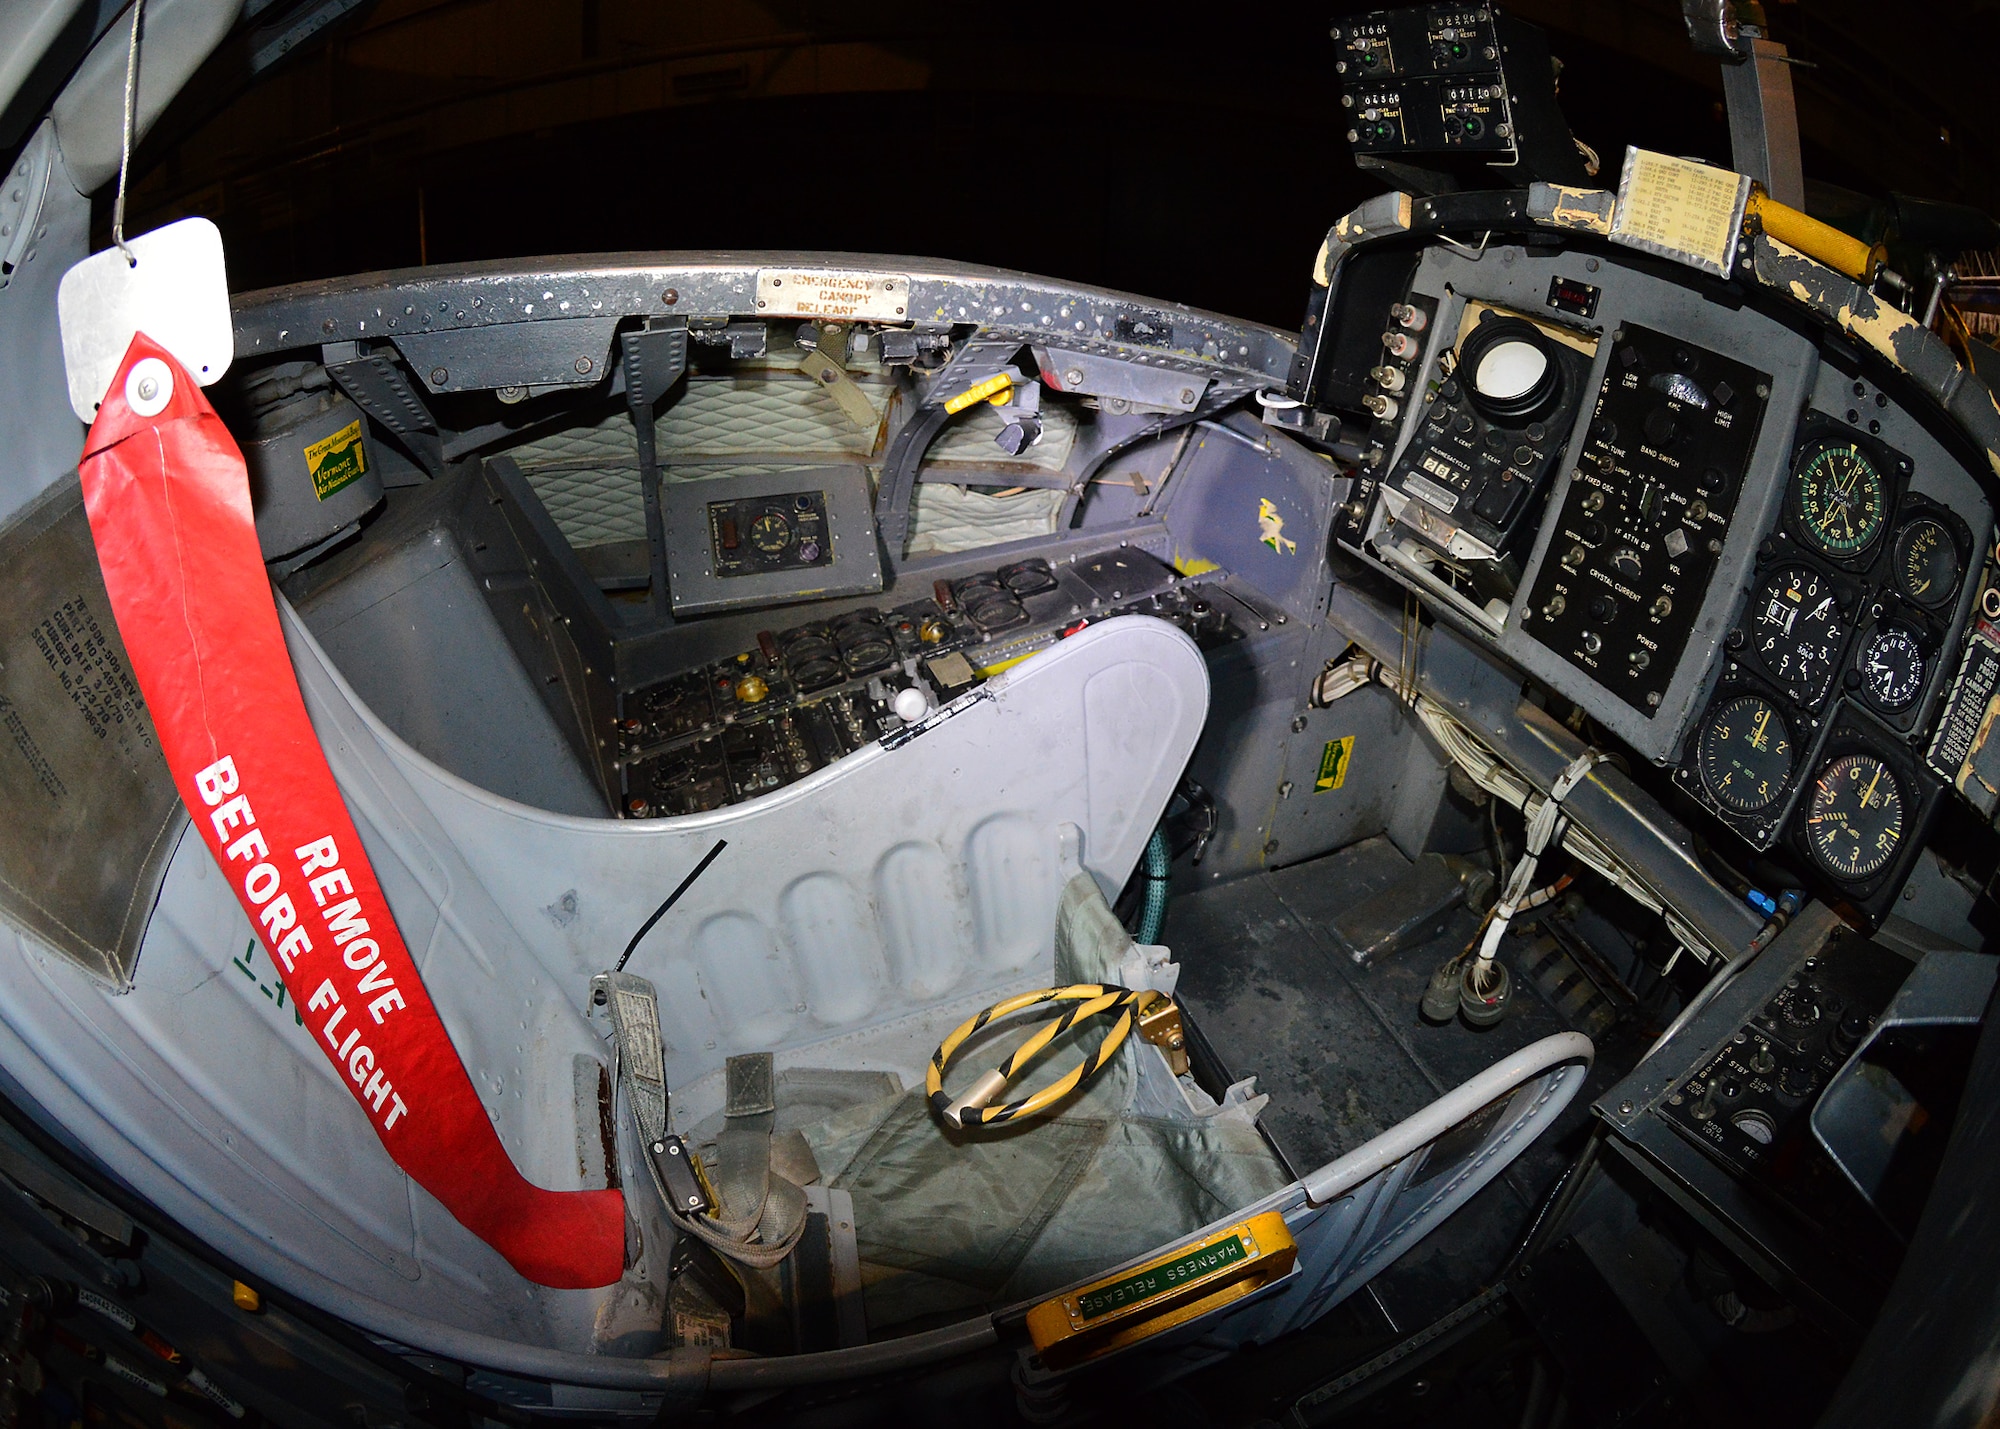 DAYTON, Ohio -- Martin B-57B Canberra rear cockpit view in the Southeast Asia War Gallery at the National Museum of the U.S. Air Force. (U.S. Air Force photo by Ken LaRock)